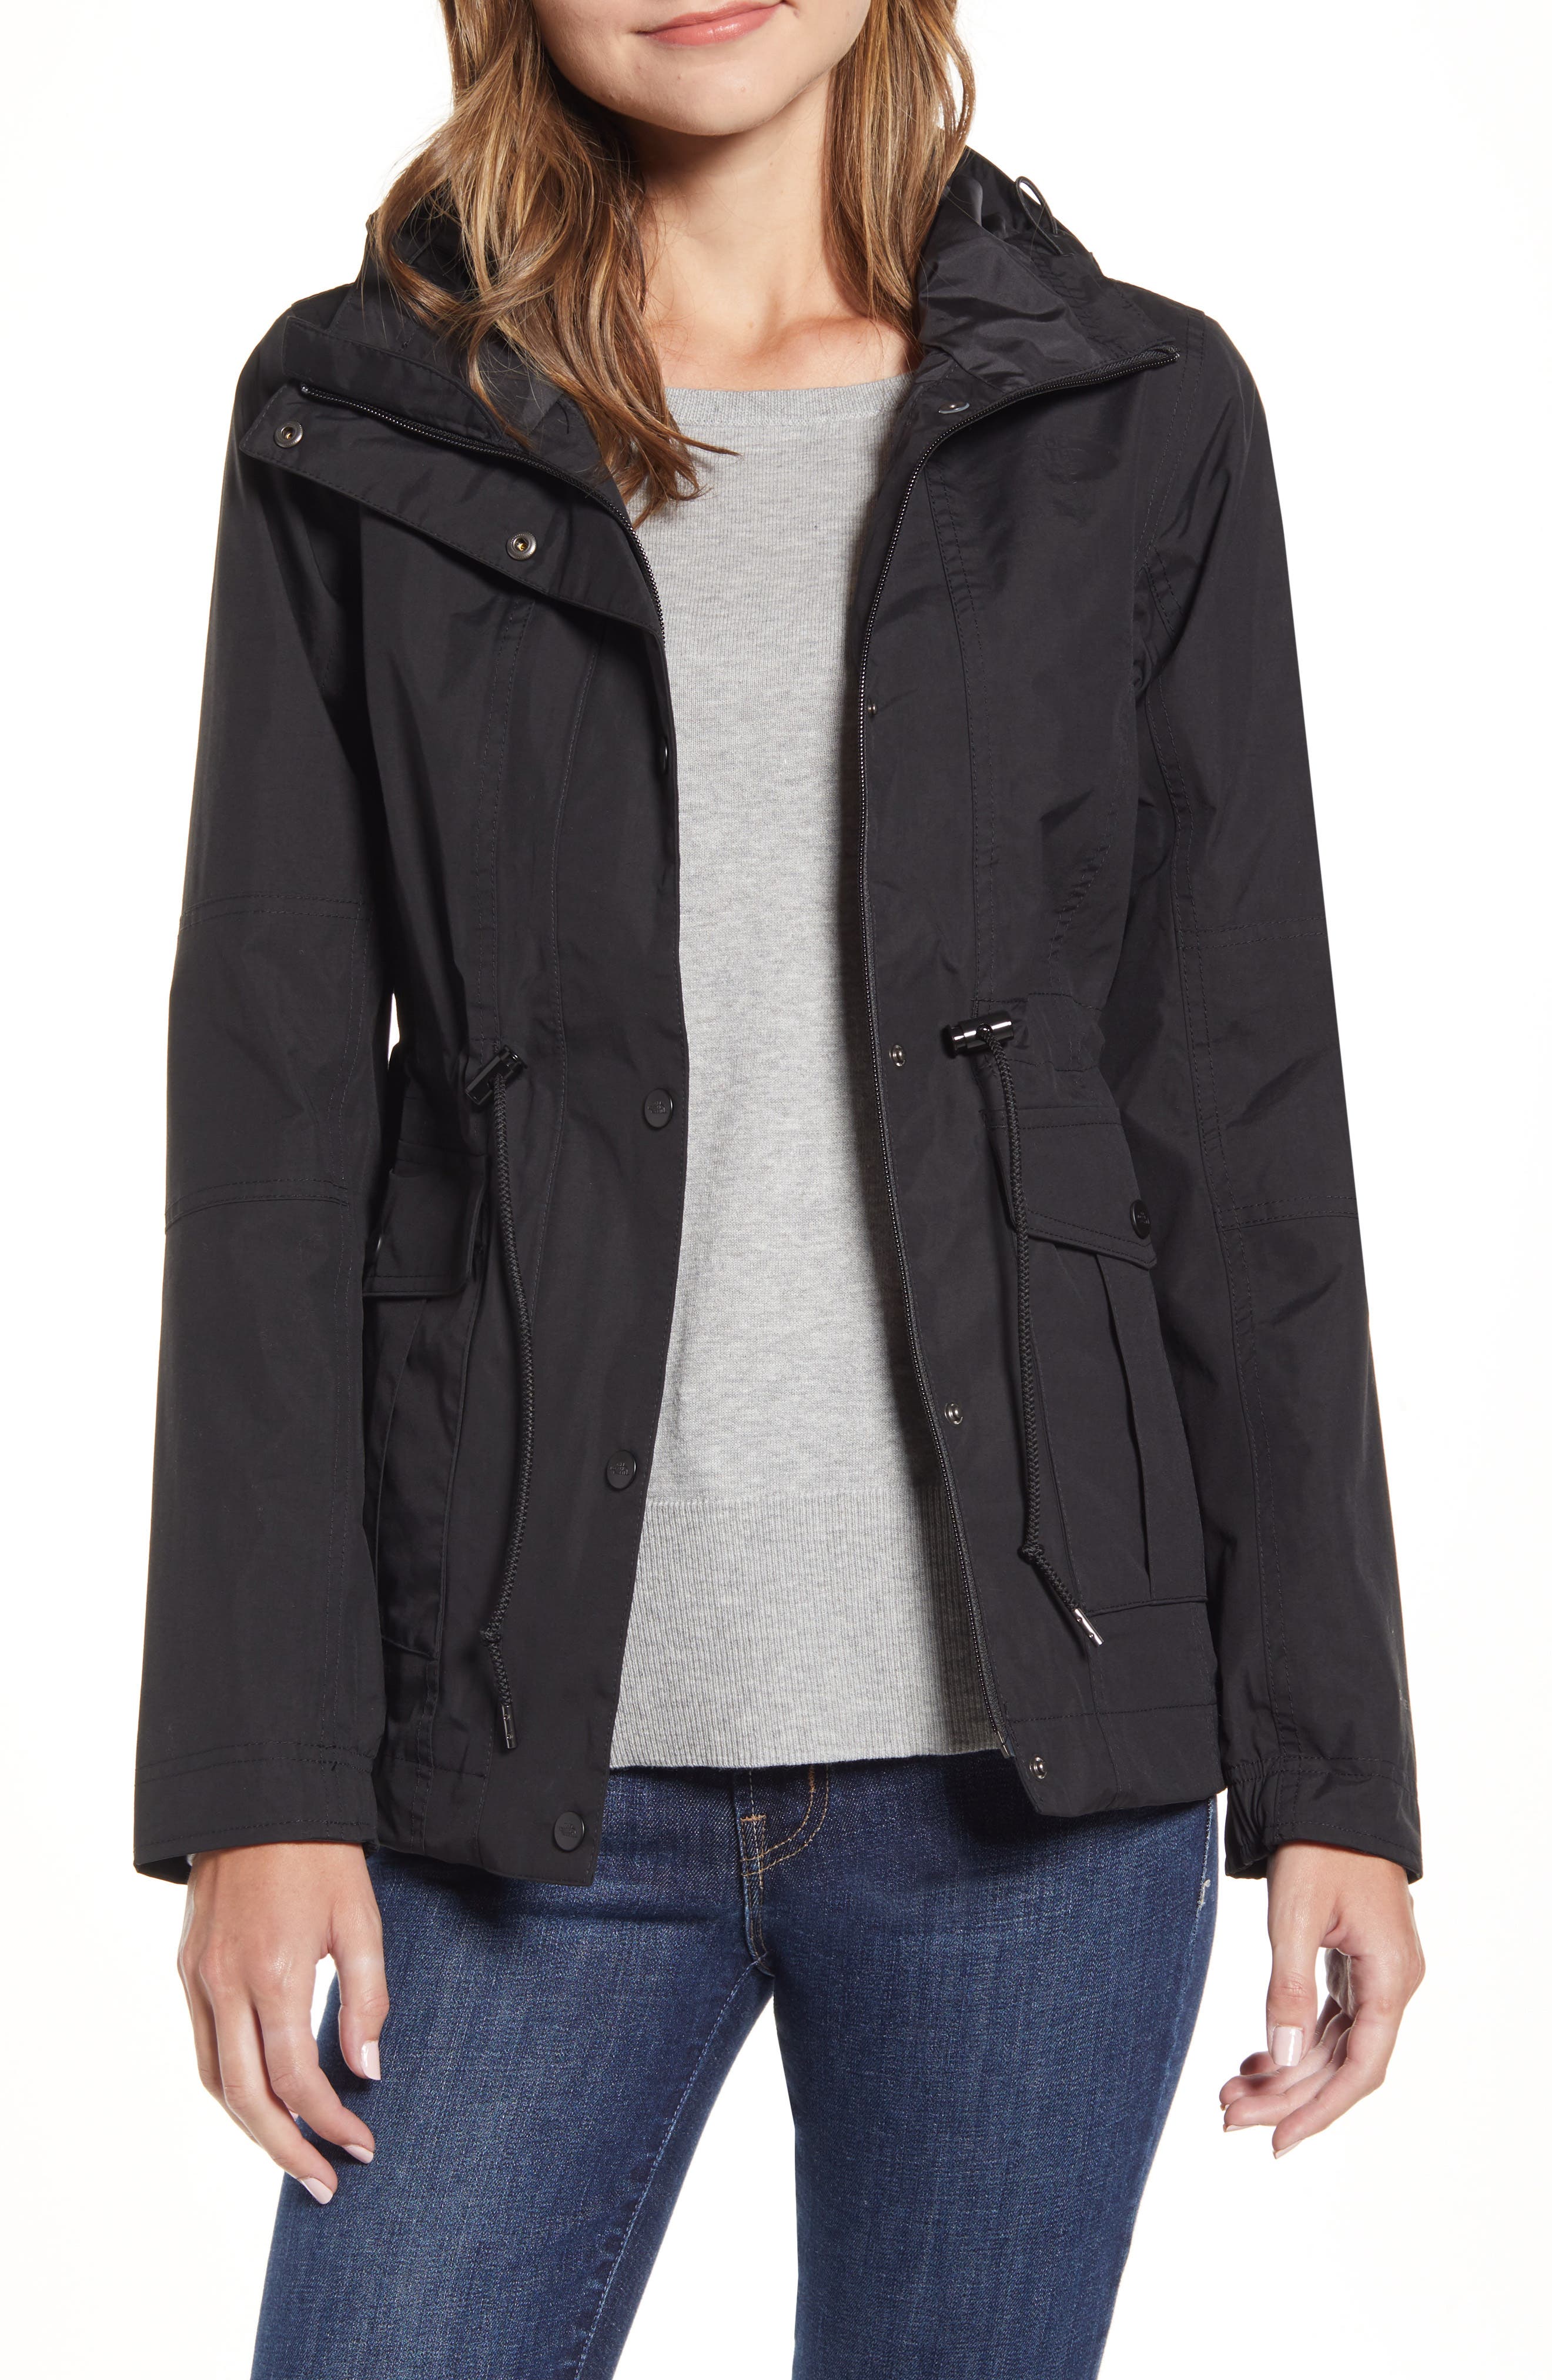 north face zoomie jacket womens